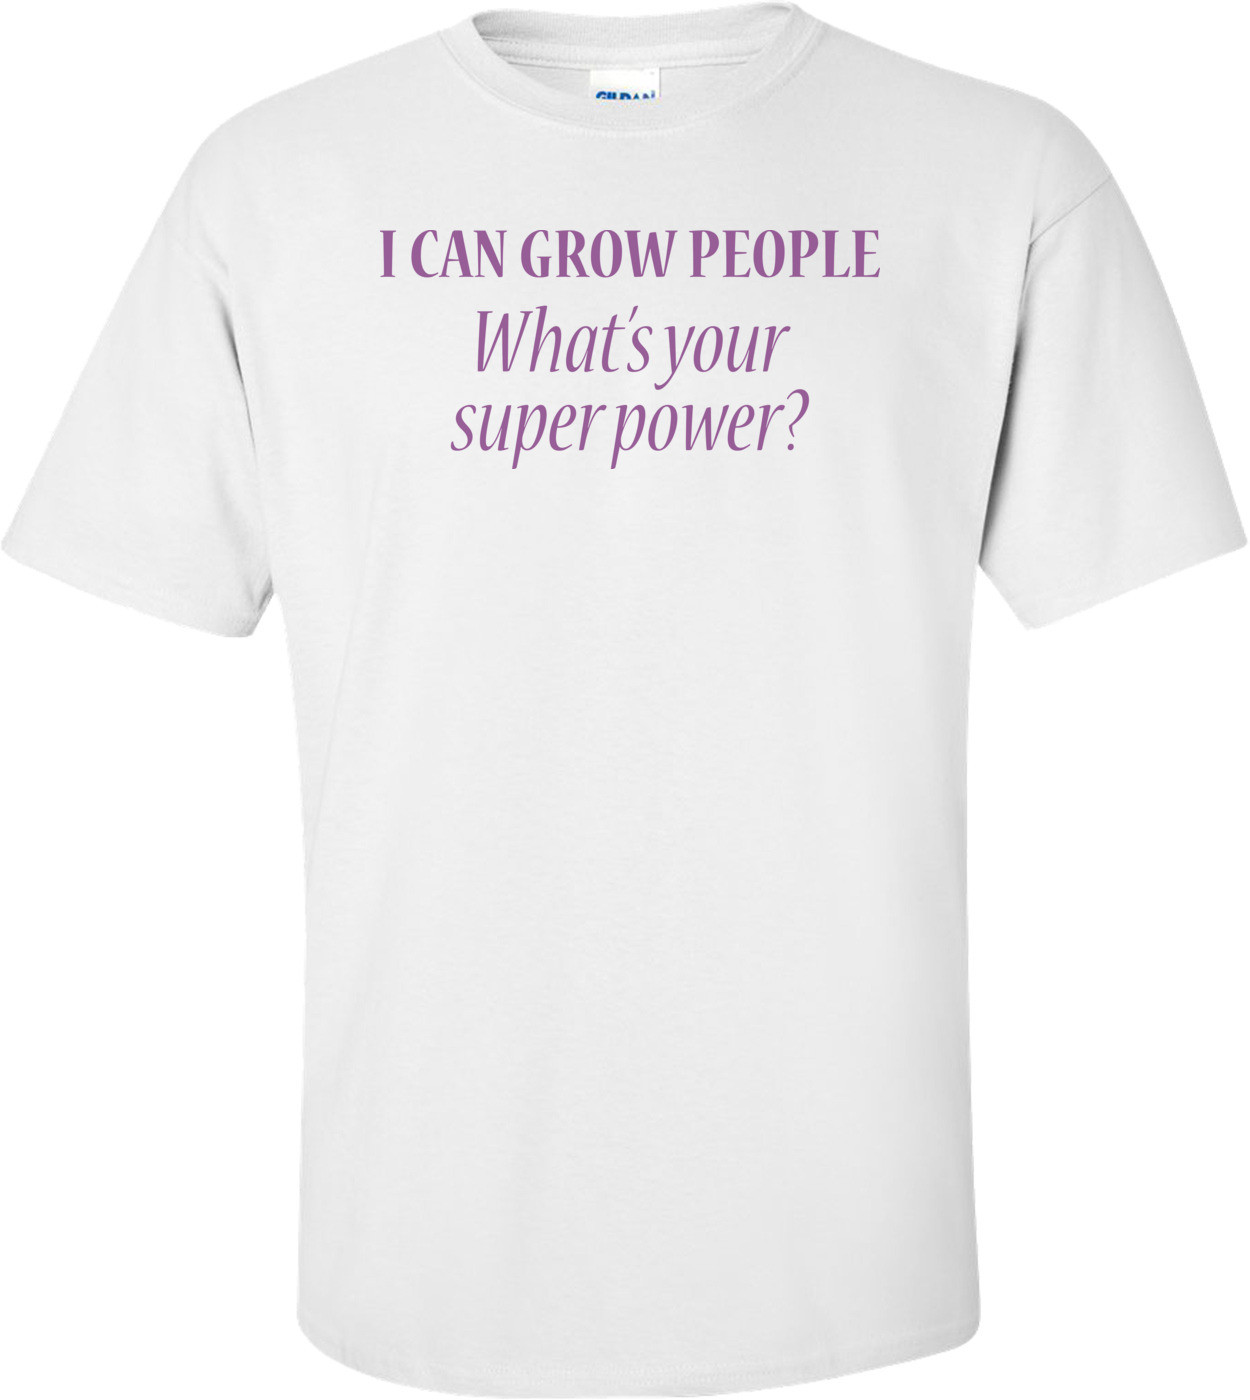 I Can Grow People. What's Your Super Power?  Funny Maternity Shirt